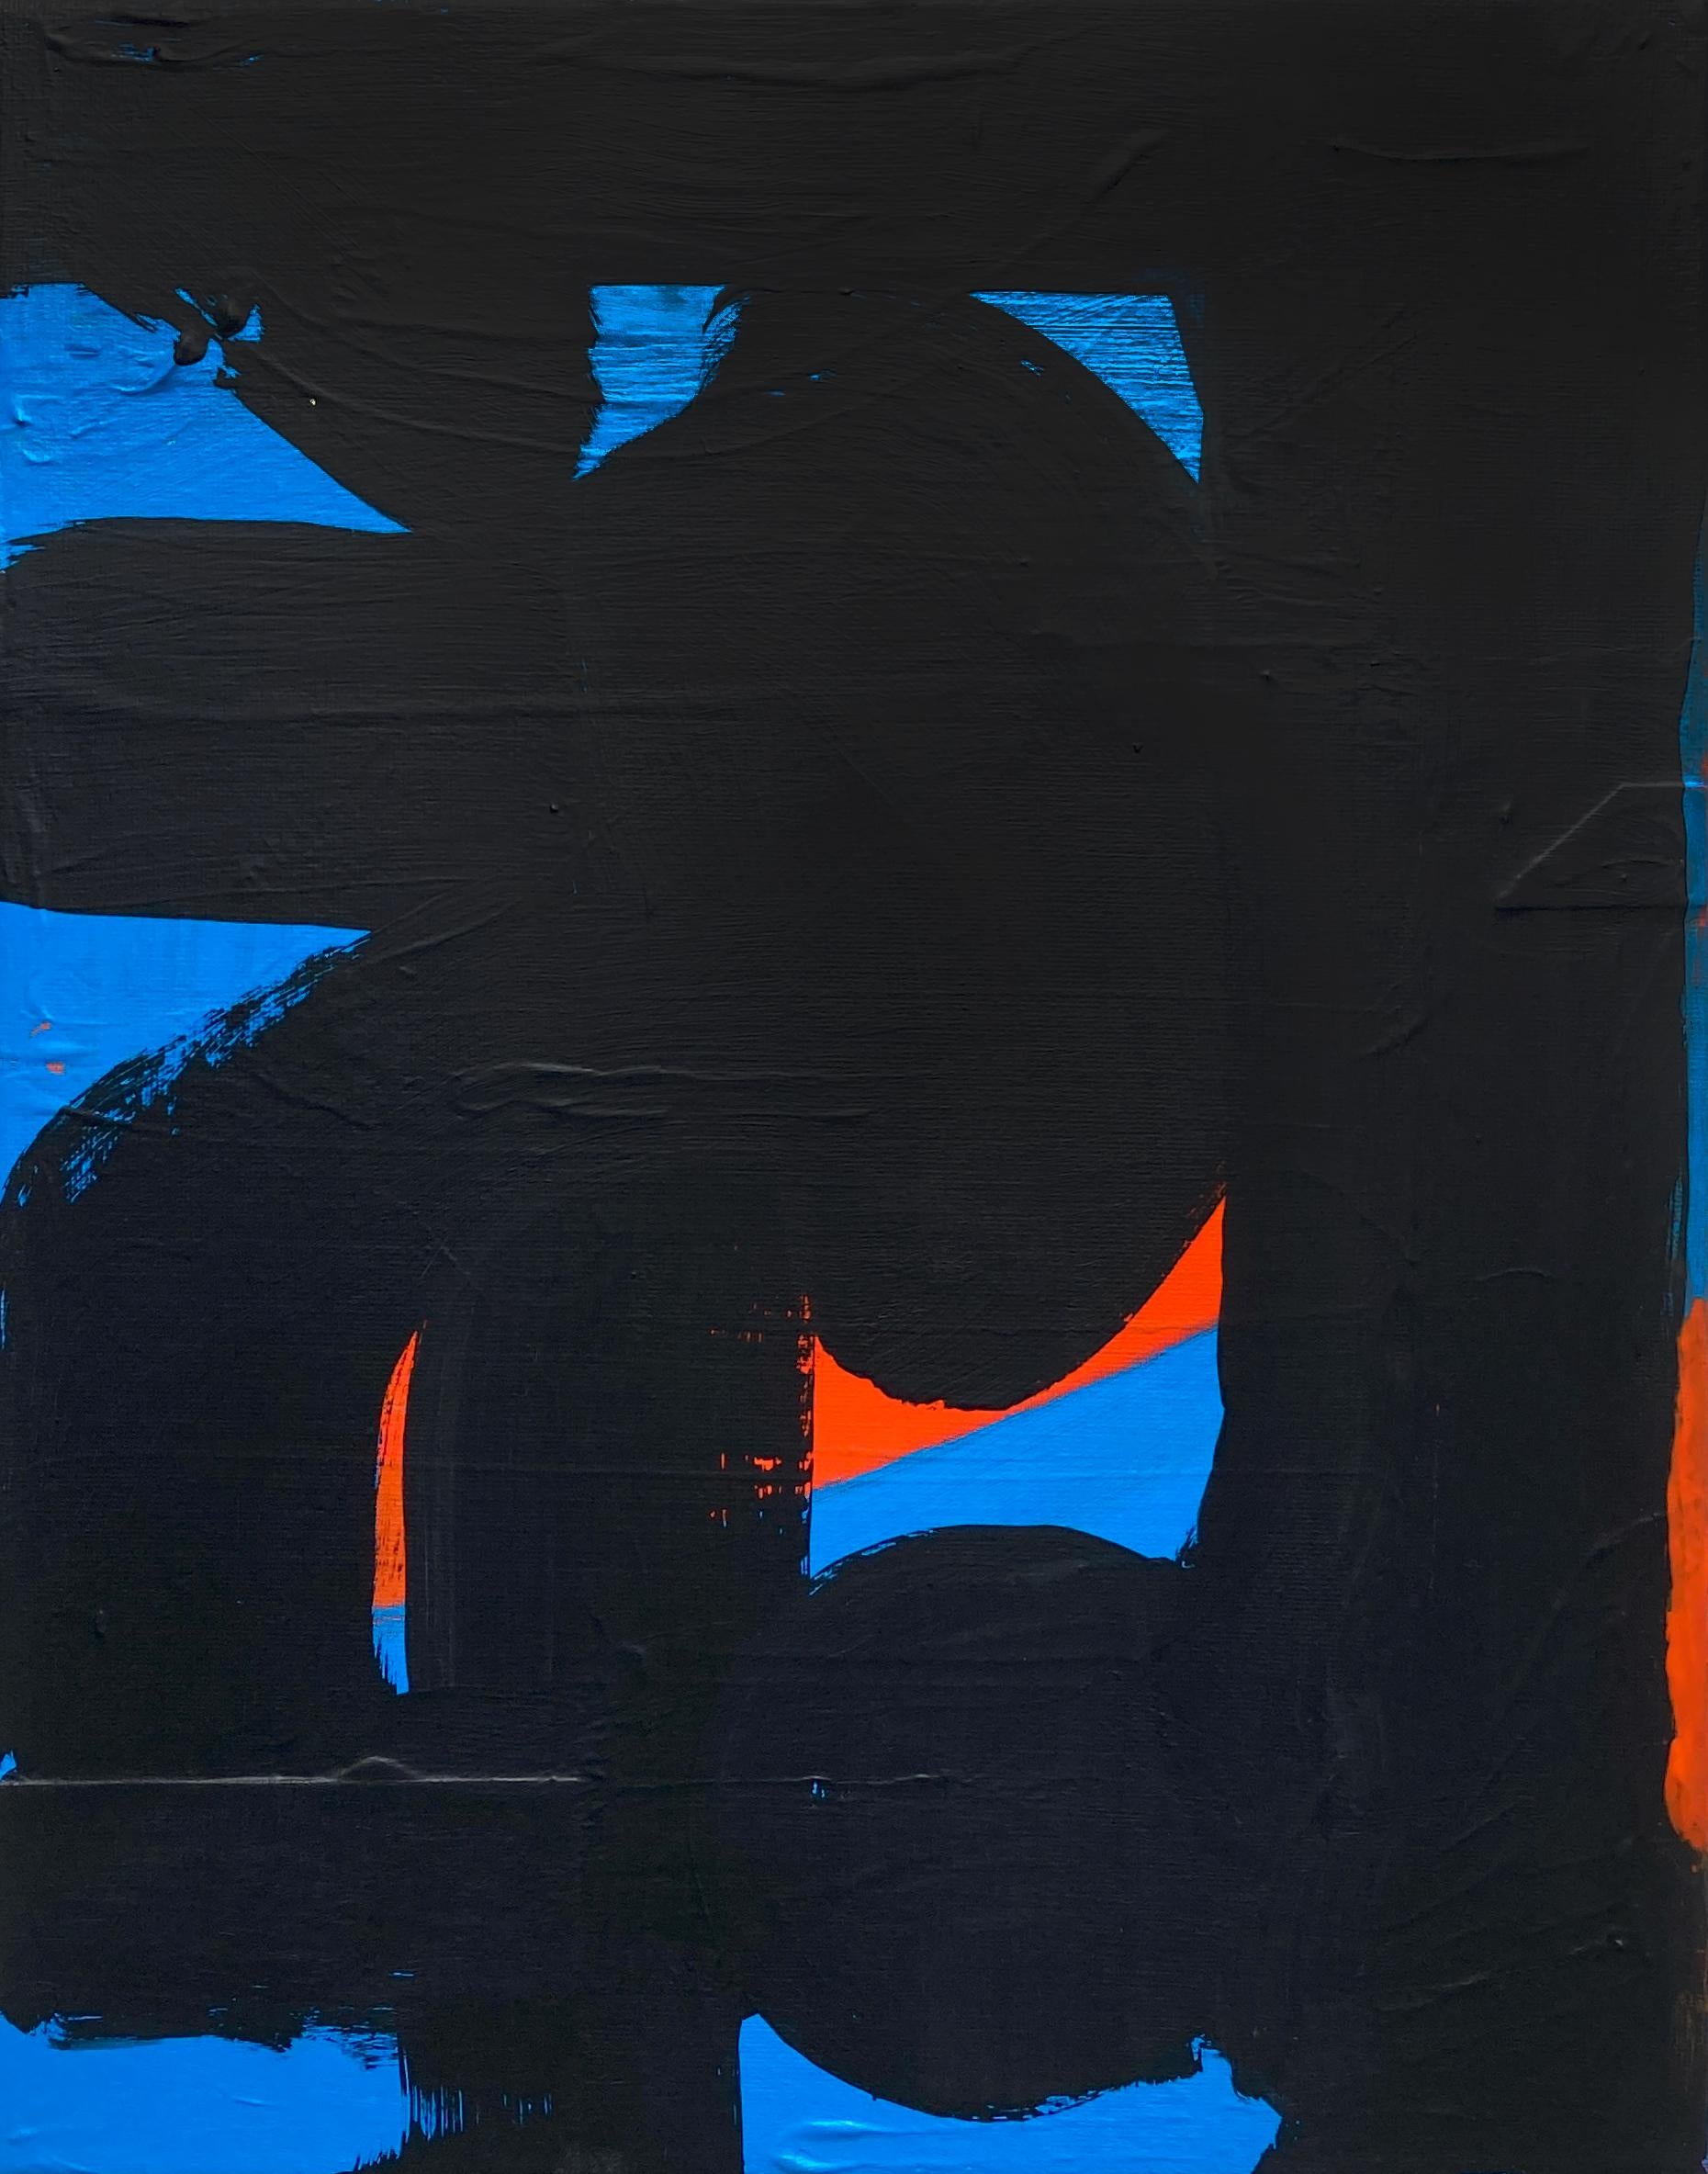 Elusive Orange uses bold brushwork and strong dynamic figure-ground relationships to create a balanced and intriguing abstract composition. The evidence of the process can be seen in little bits of color on the edges of the canvas as well as the